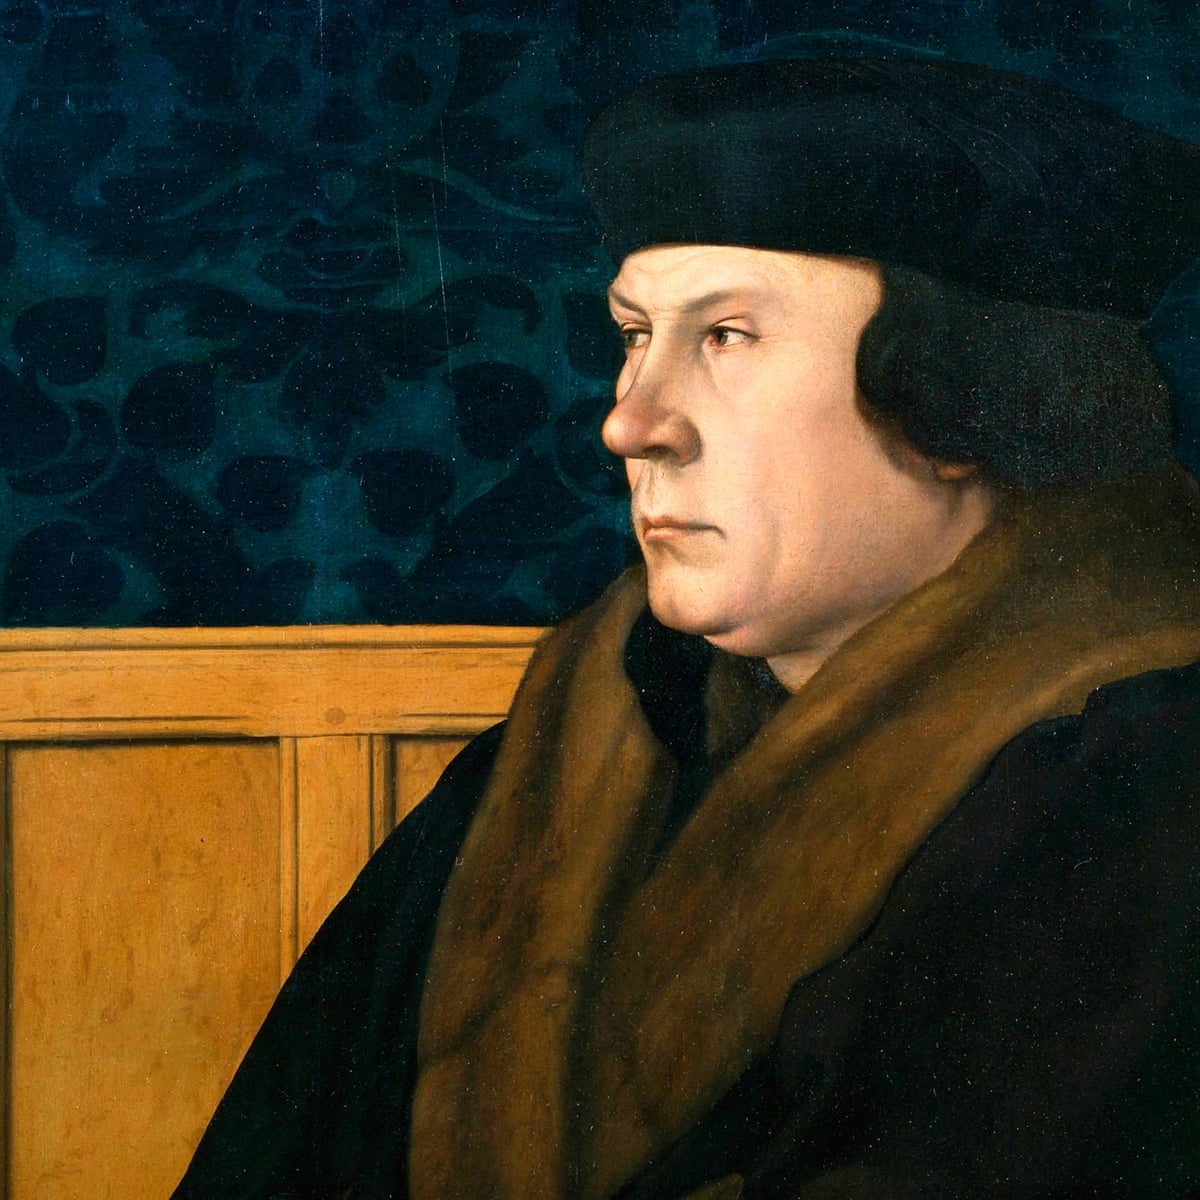 Cromwell Struggled to Control Closure of the Monasteries as His Government Lost Its Grip During Dissolution, New Book Shows